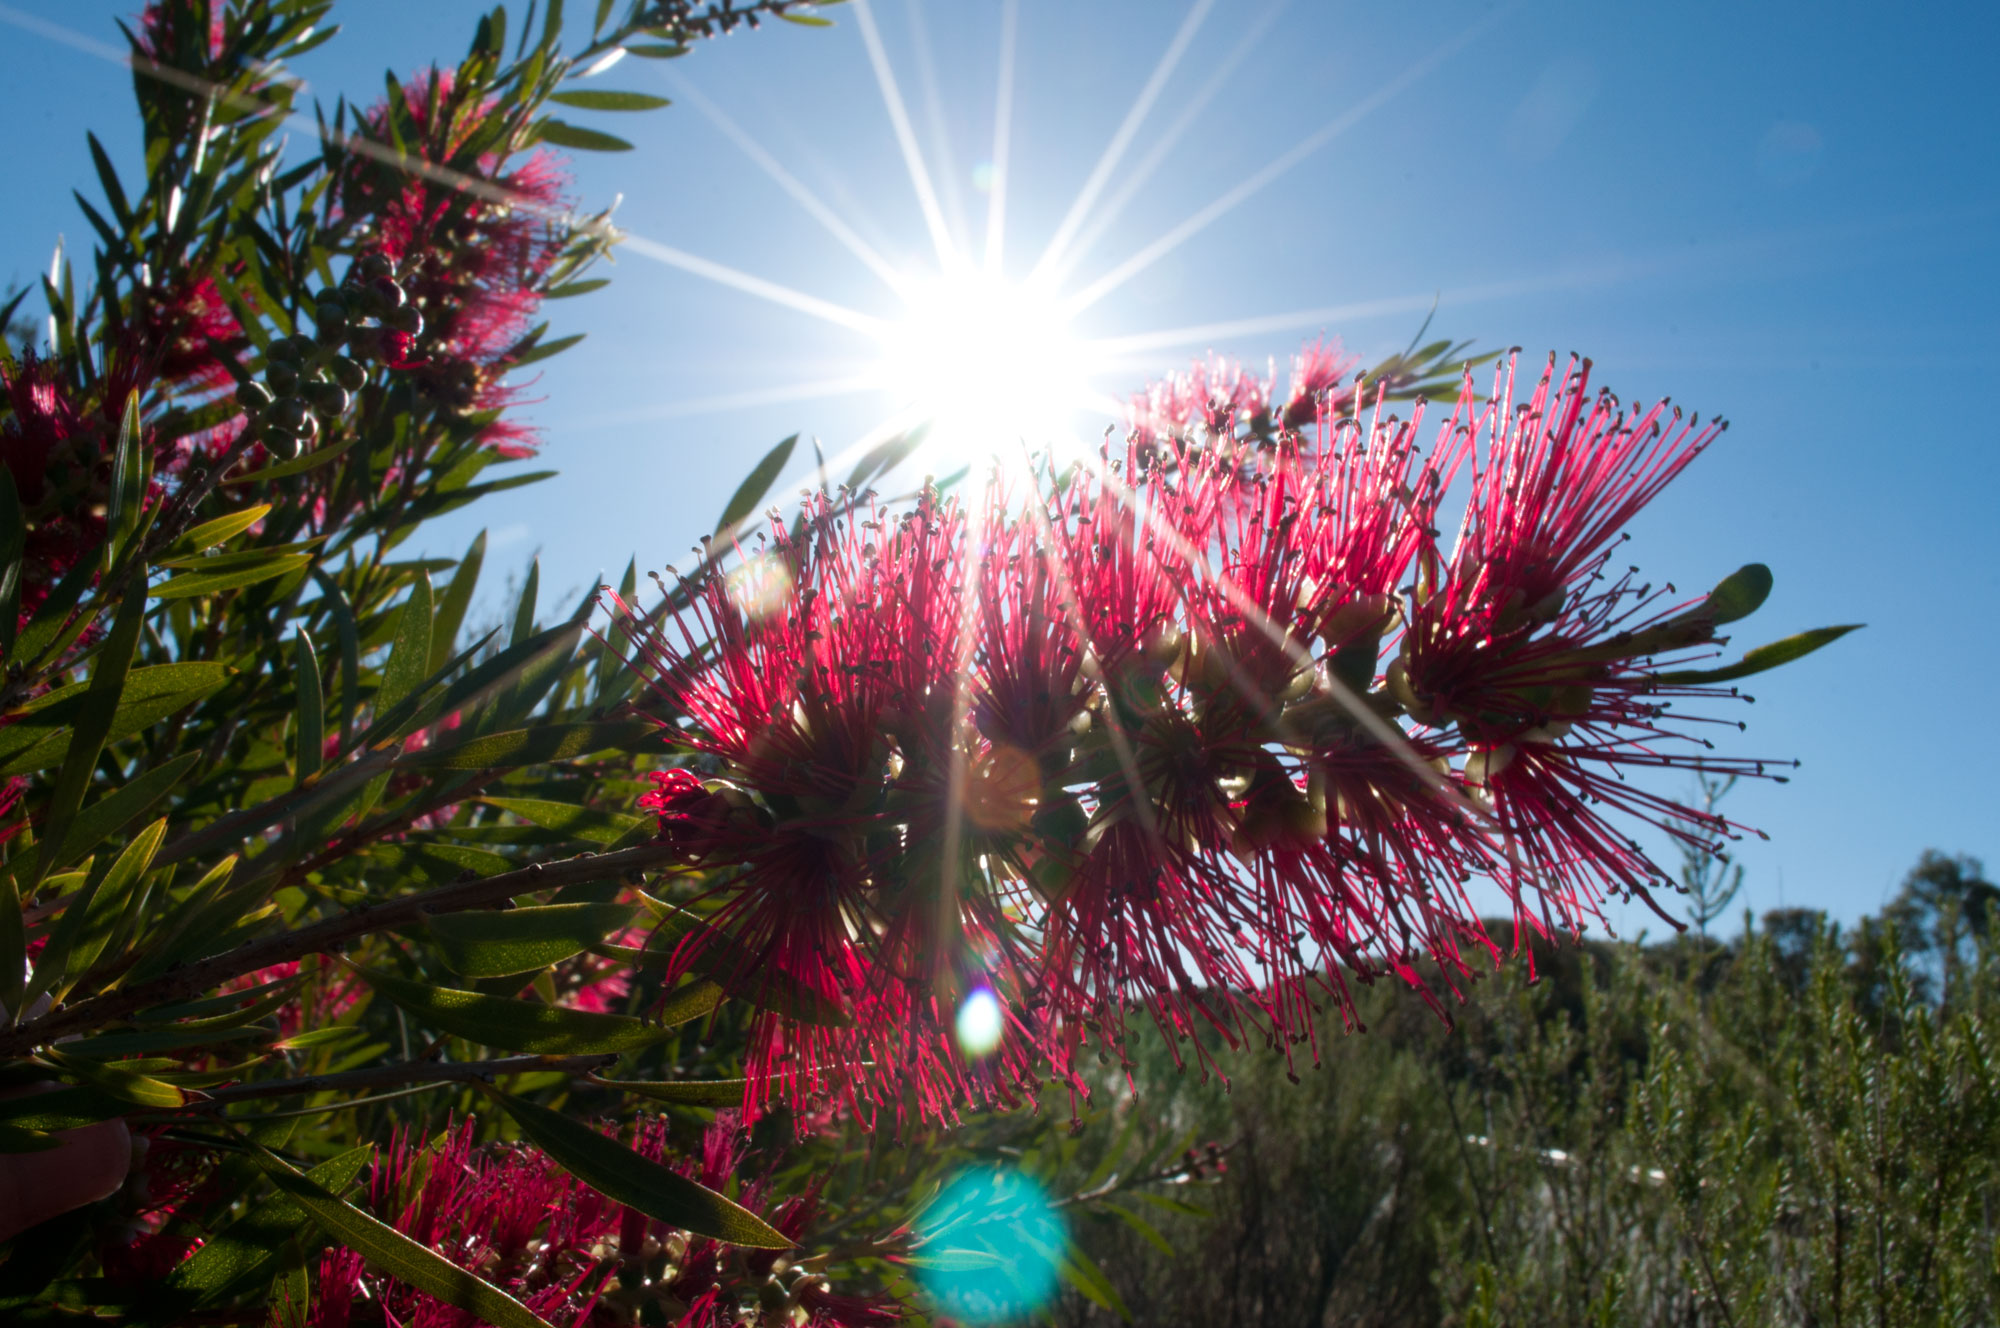 As spring moves into summer, the wattle is replaced by bottle brush